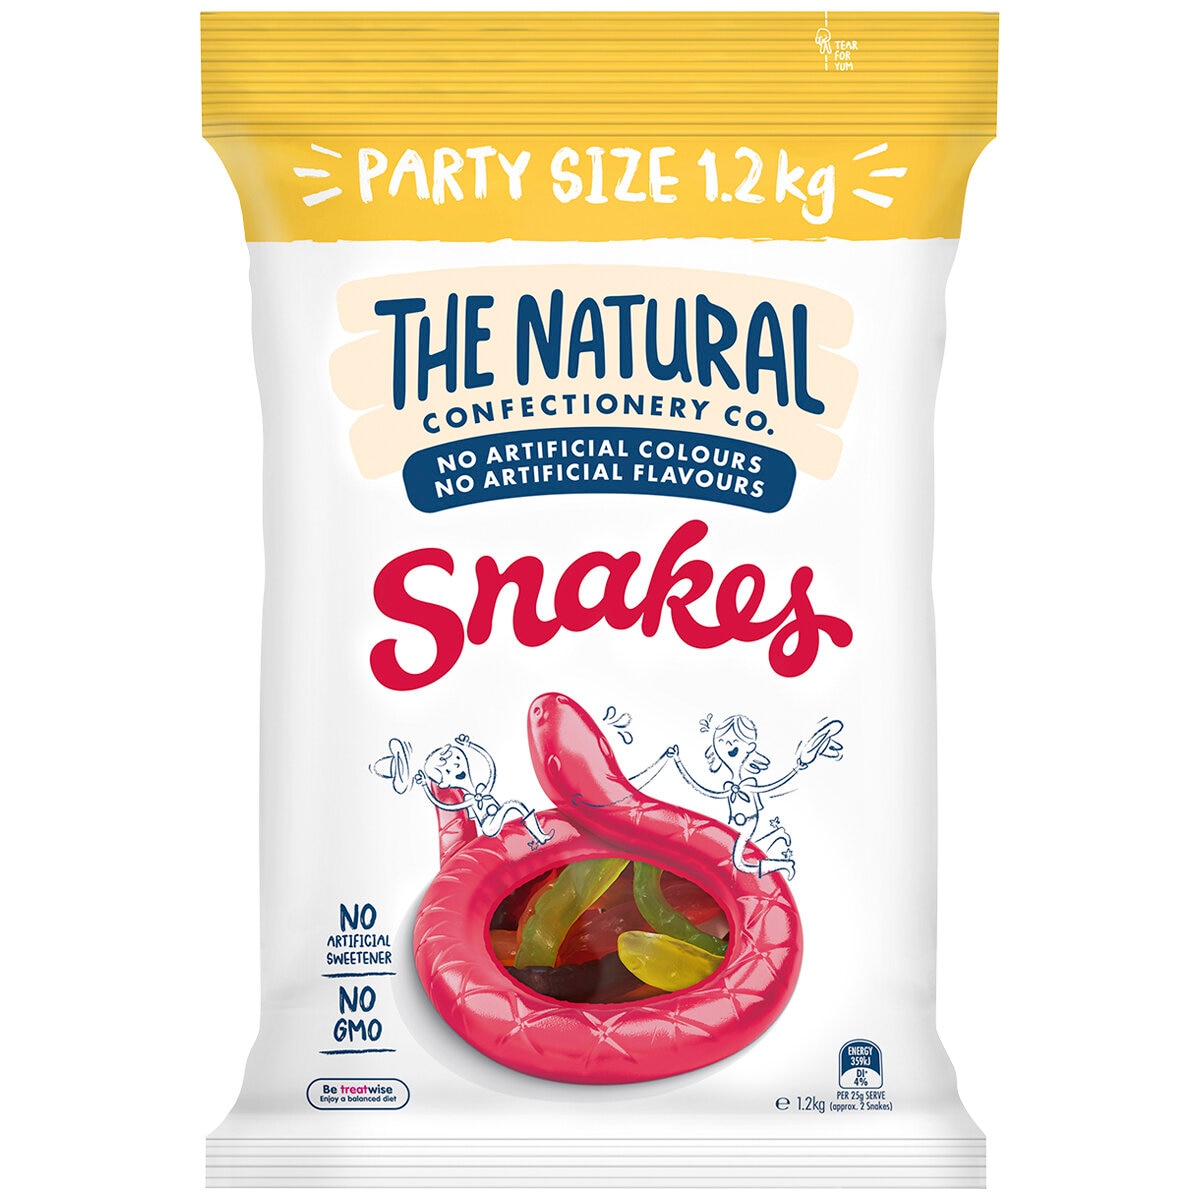 The Natural Confectionery Company Snakes 1.2 kg